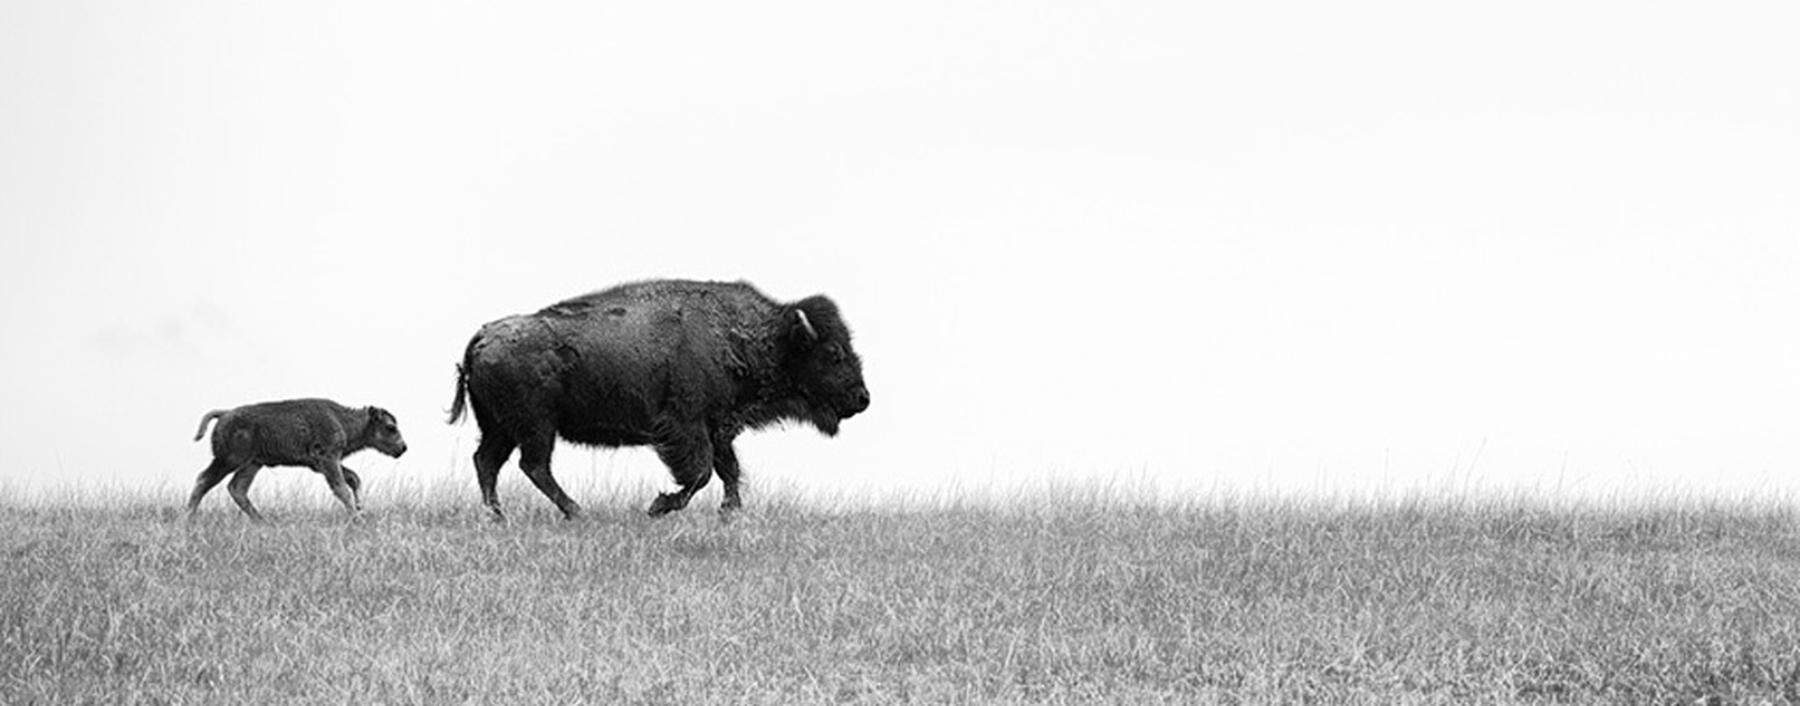 Female bison with young